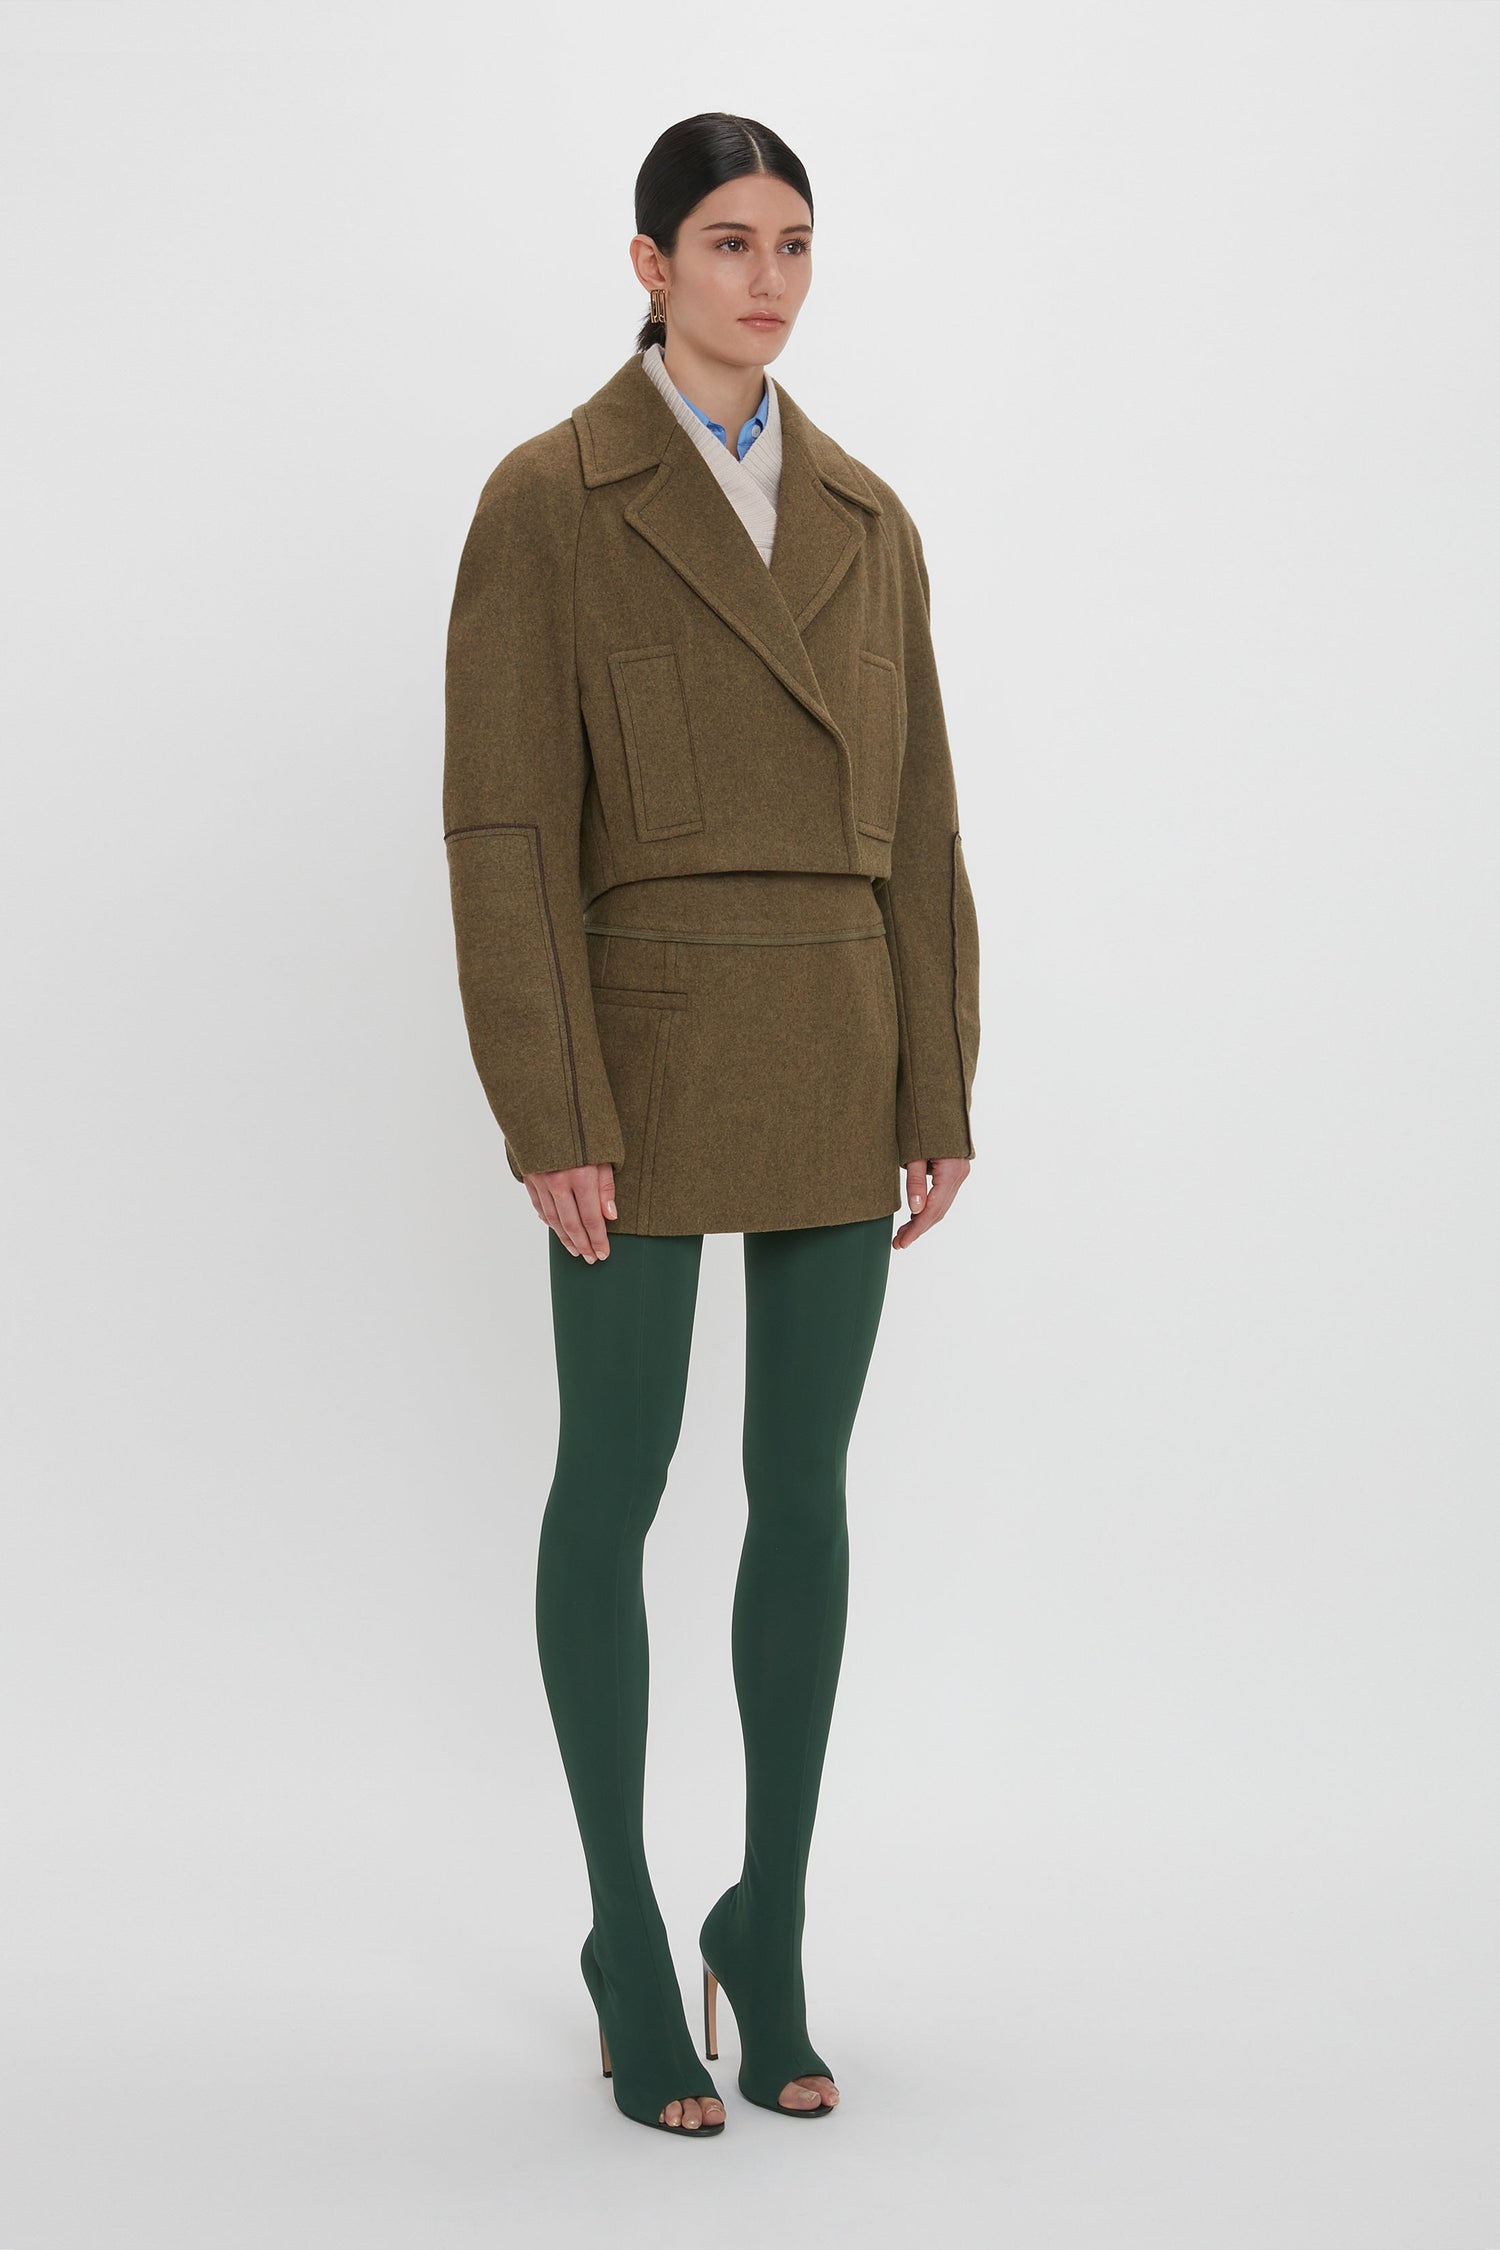 A person stands facing slightly to the right, wearing a waist-defining Cropped Pea Coat In Khaki by Victoria Beckham, matching skirt, green tights, and beige high heels against a plain white background.